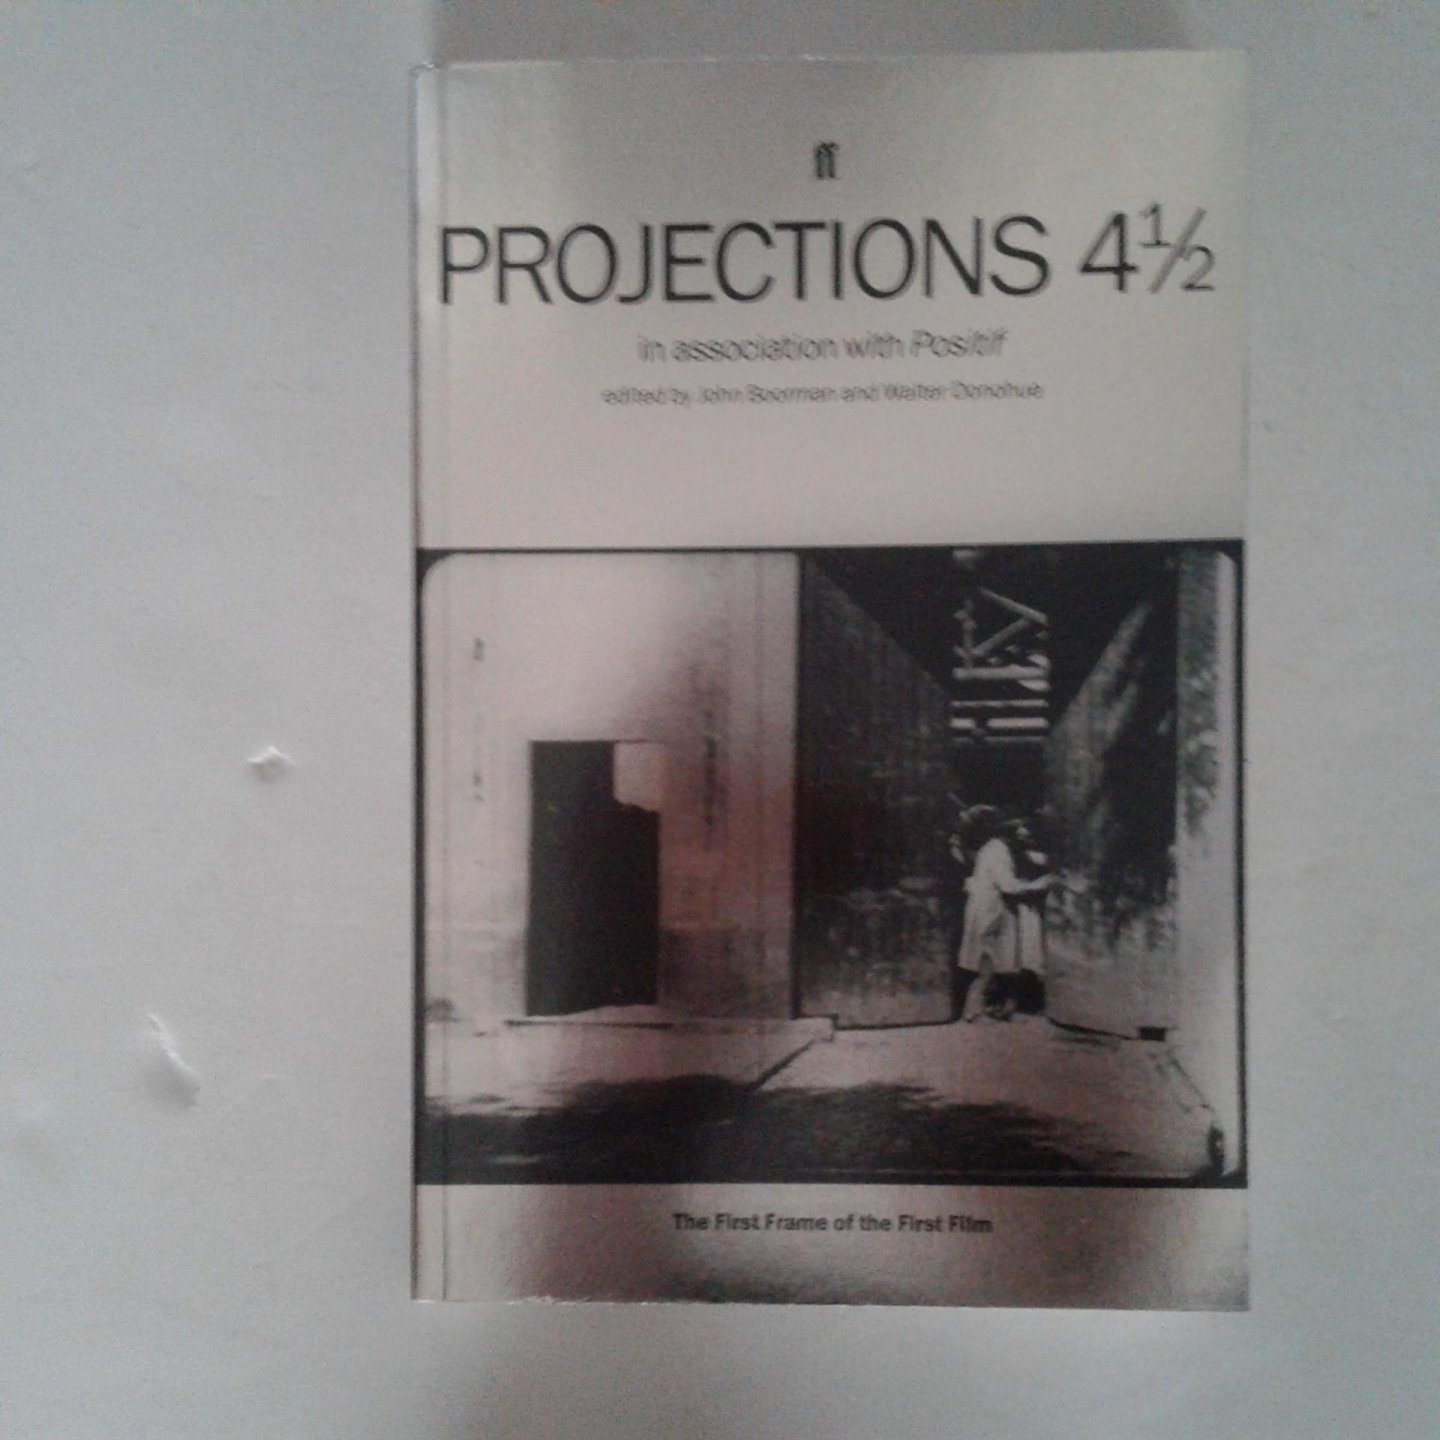 Boorman, John ; Walter Donohue - Projections 4 1/2 ; In Association with Positif